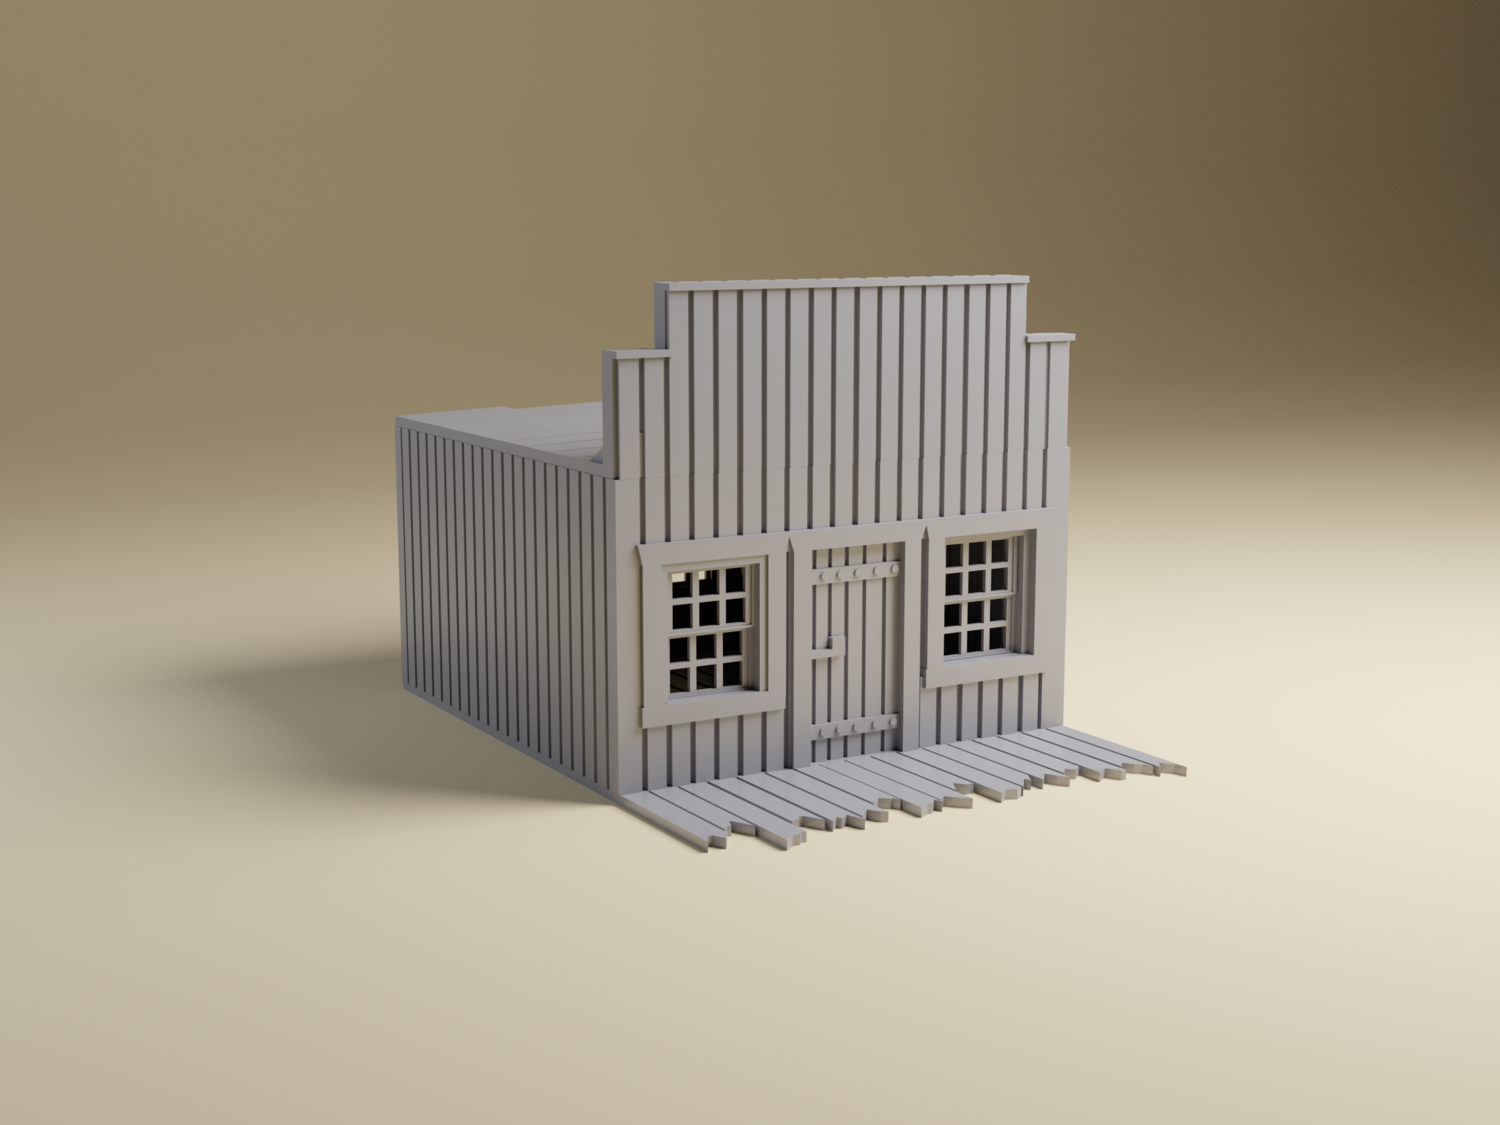 3d Printed Wild West Small Building #1. Terrain for 28mm Miniature Tabletop wargaming with Dead Man&#39;s Hand, What a Cowboy